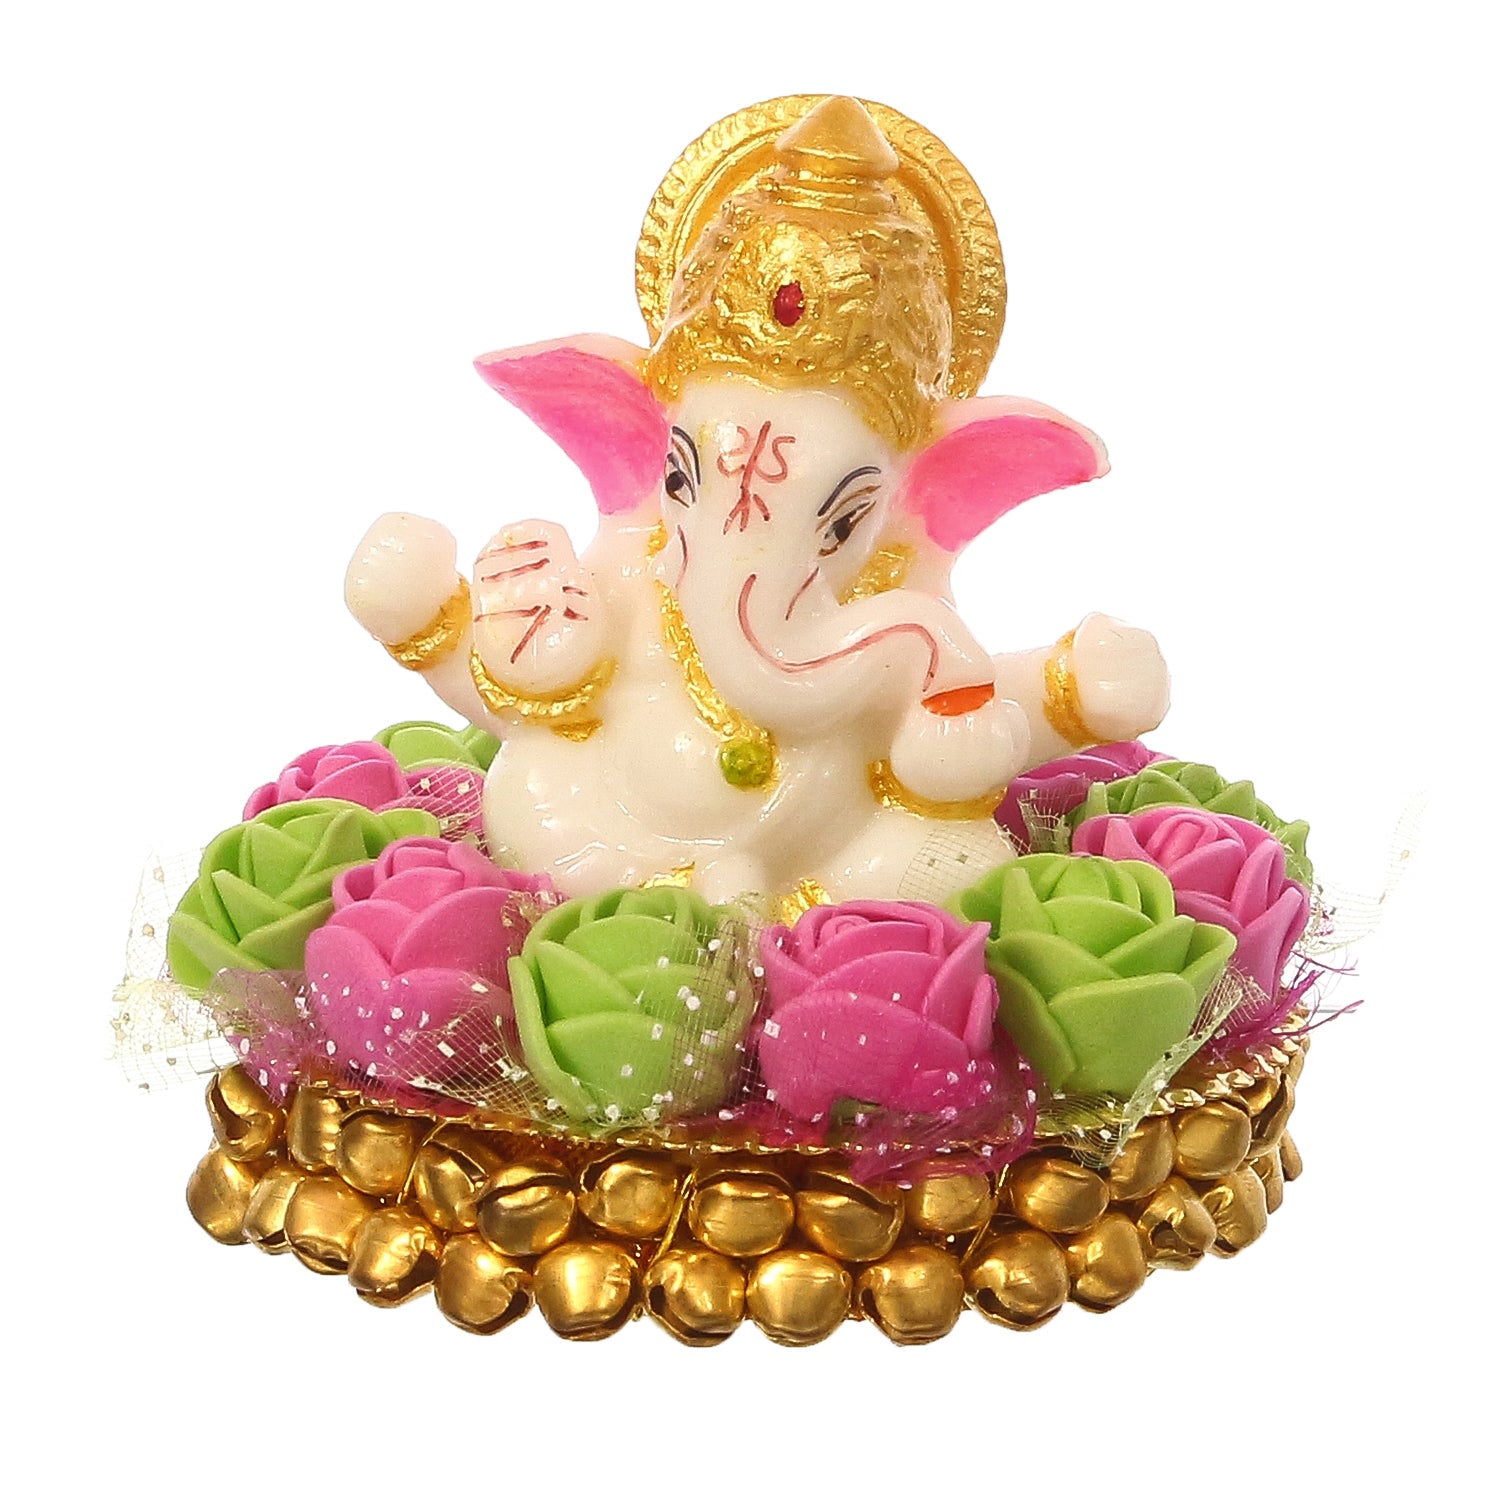 Golden and White Polyresin Lord Ganesha Idol on Decorative Pink and Green Flowers Plate 2